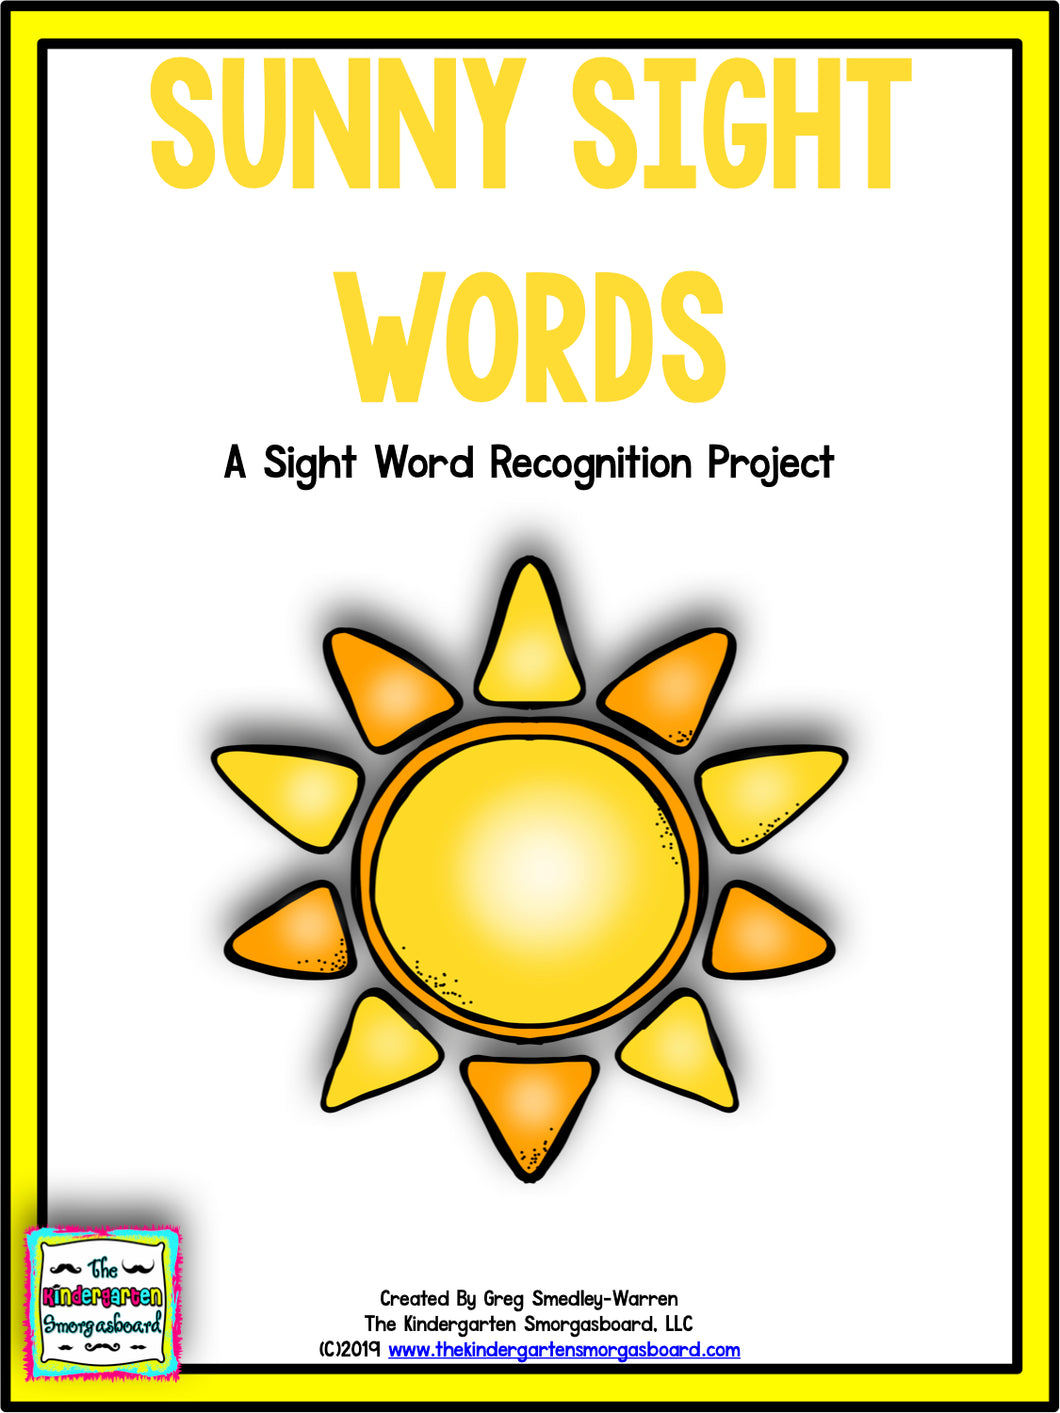 Sunny Sight Words Recognition Project